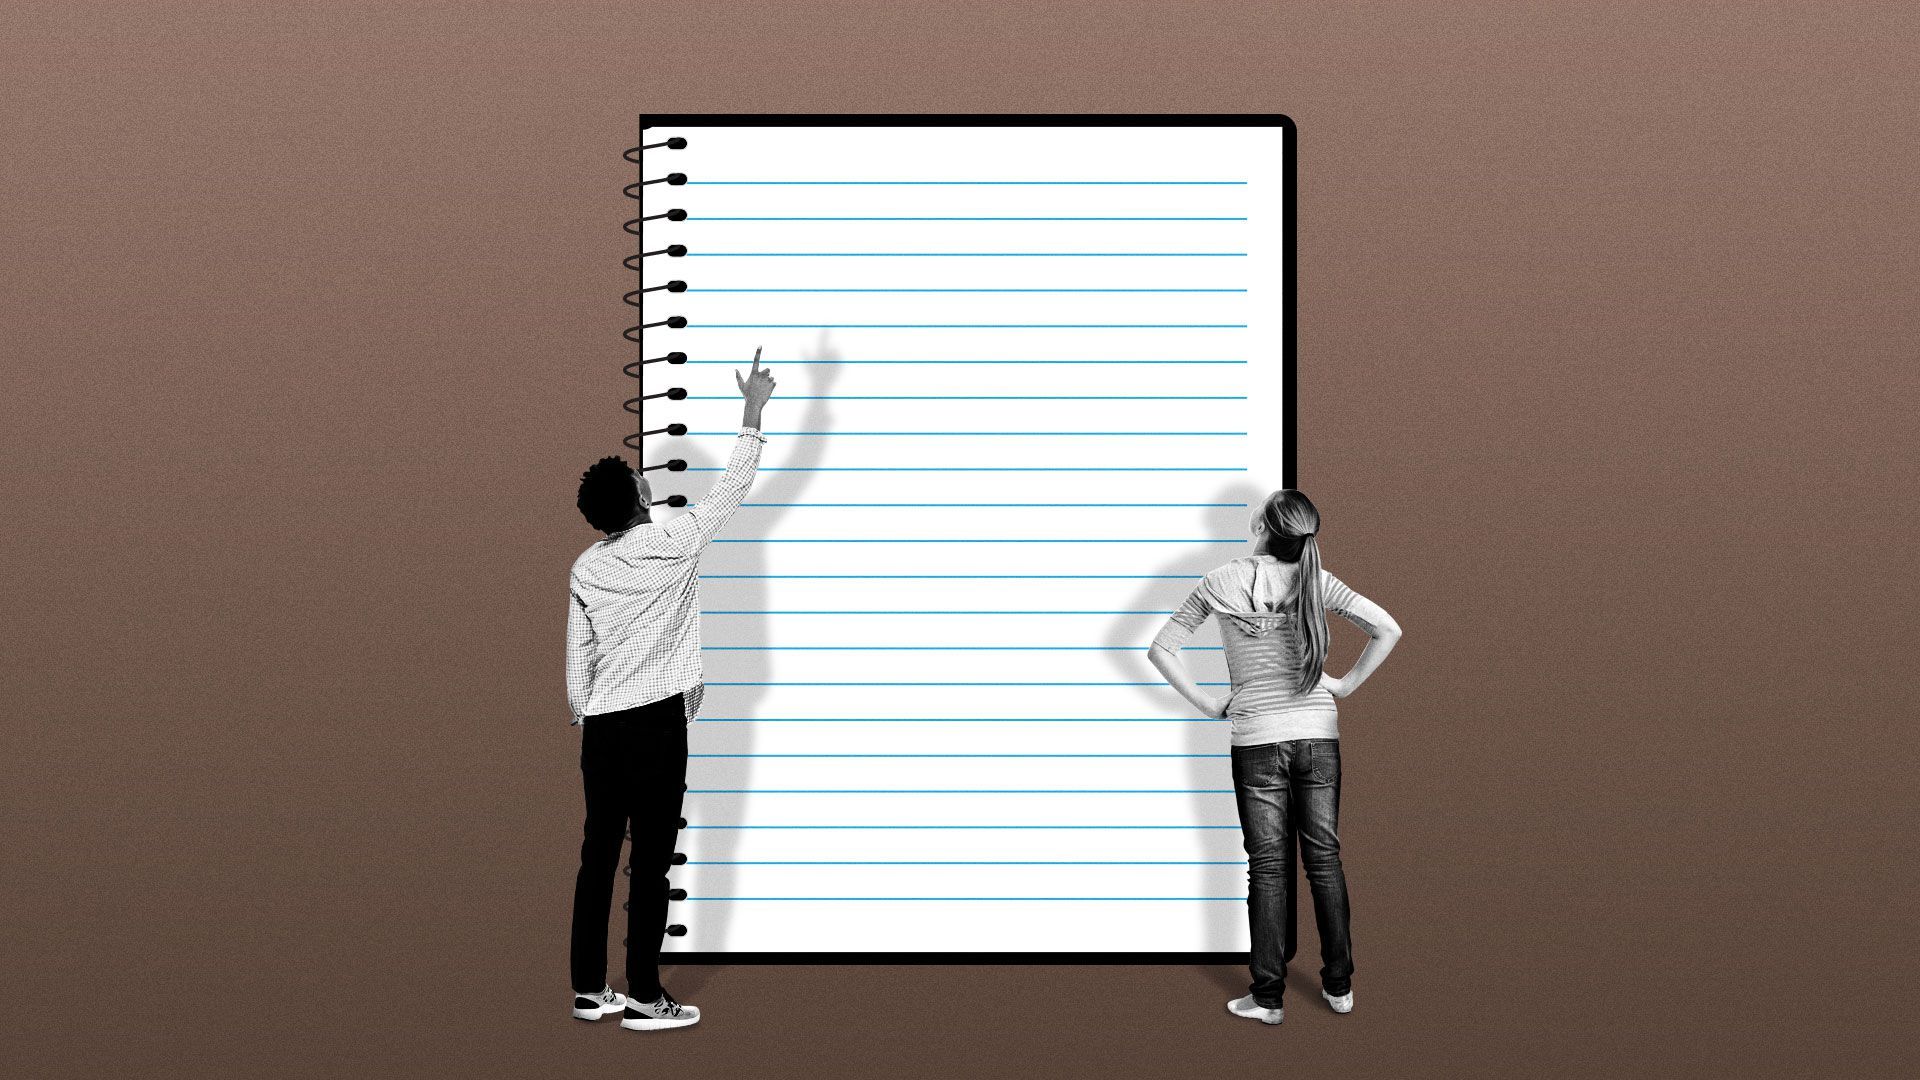 Illustration of two people divided by a school notebook, with one black student pointing at it while the white student looks up with arms on her hips